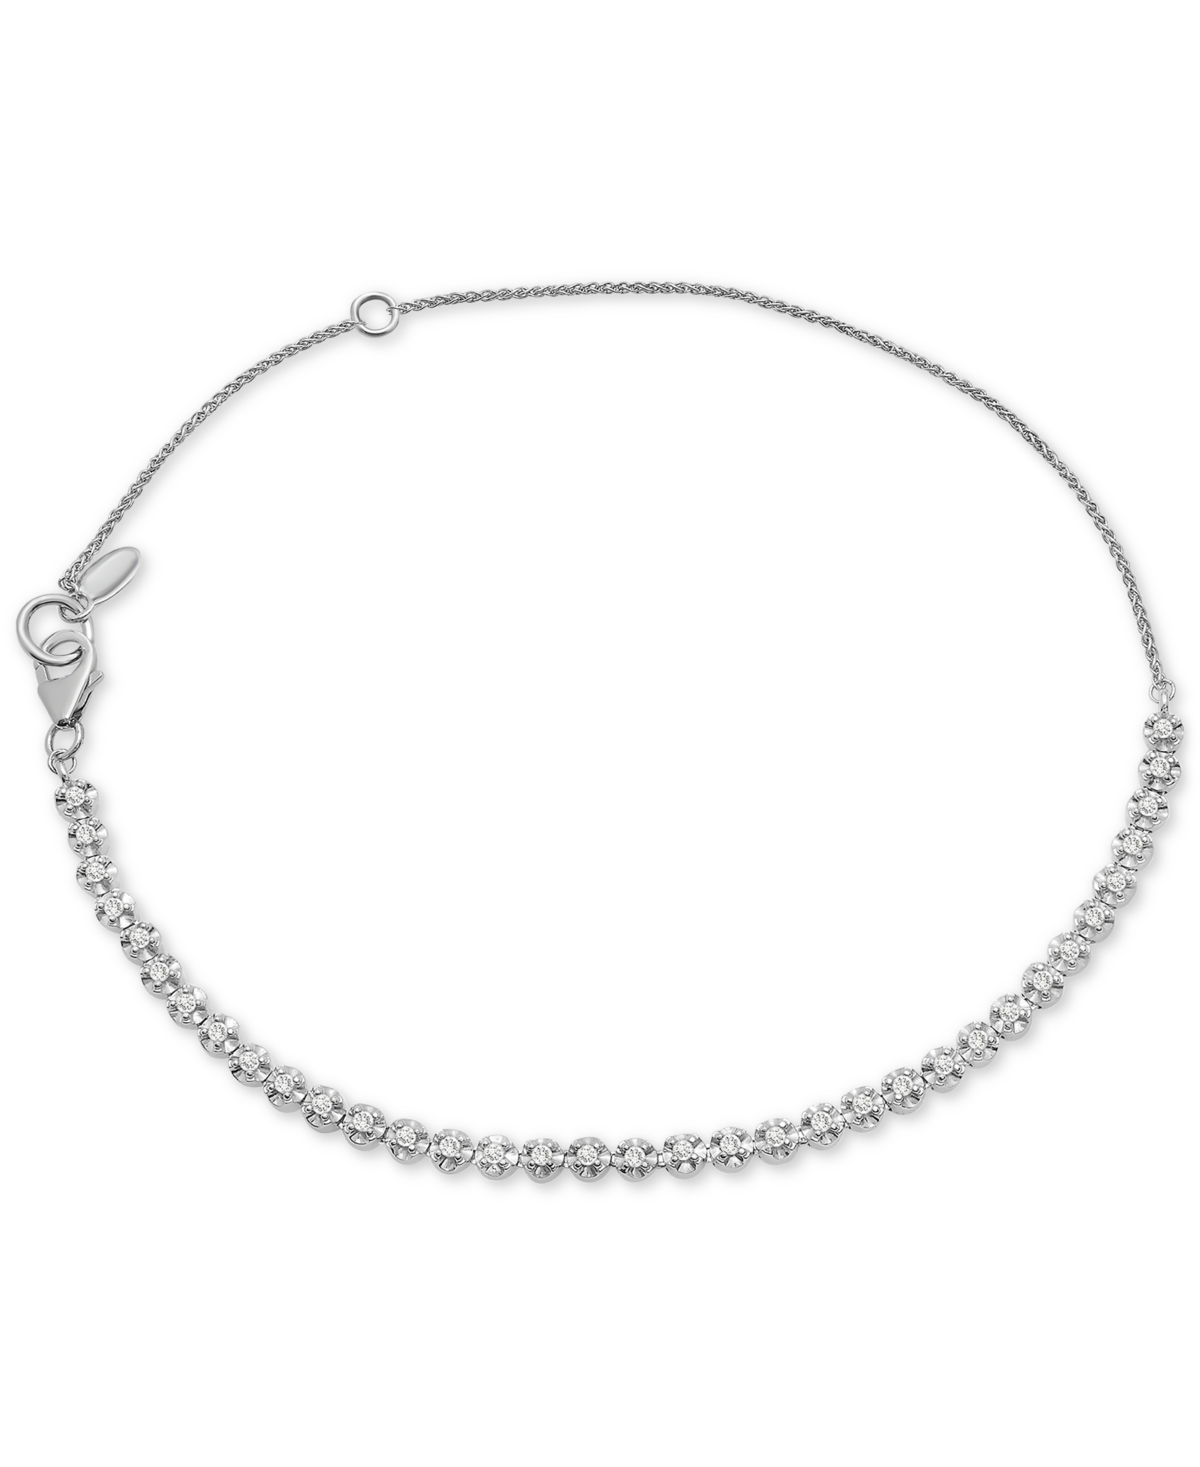 Diamond Tennis Bolo Anklet (1/2 ct. t.w.) in Sterling Silver, Created for Macy's - Sterling Silver